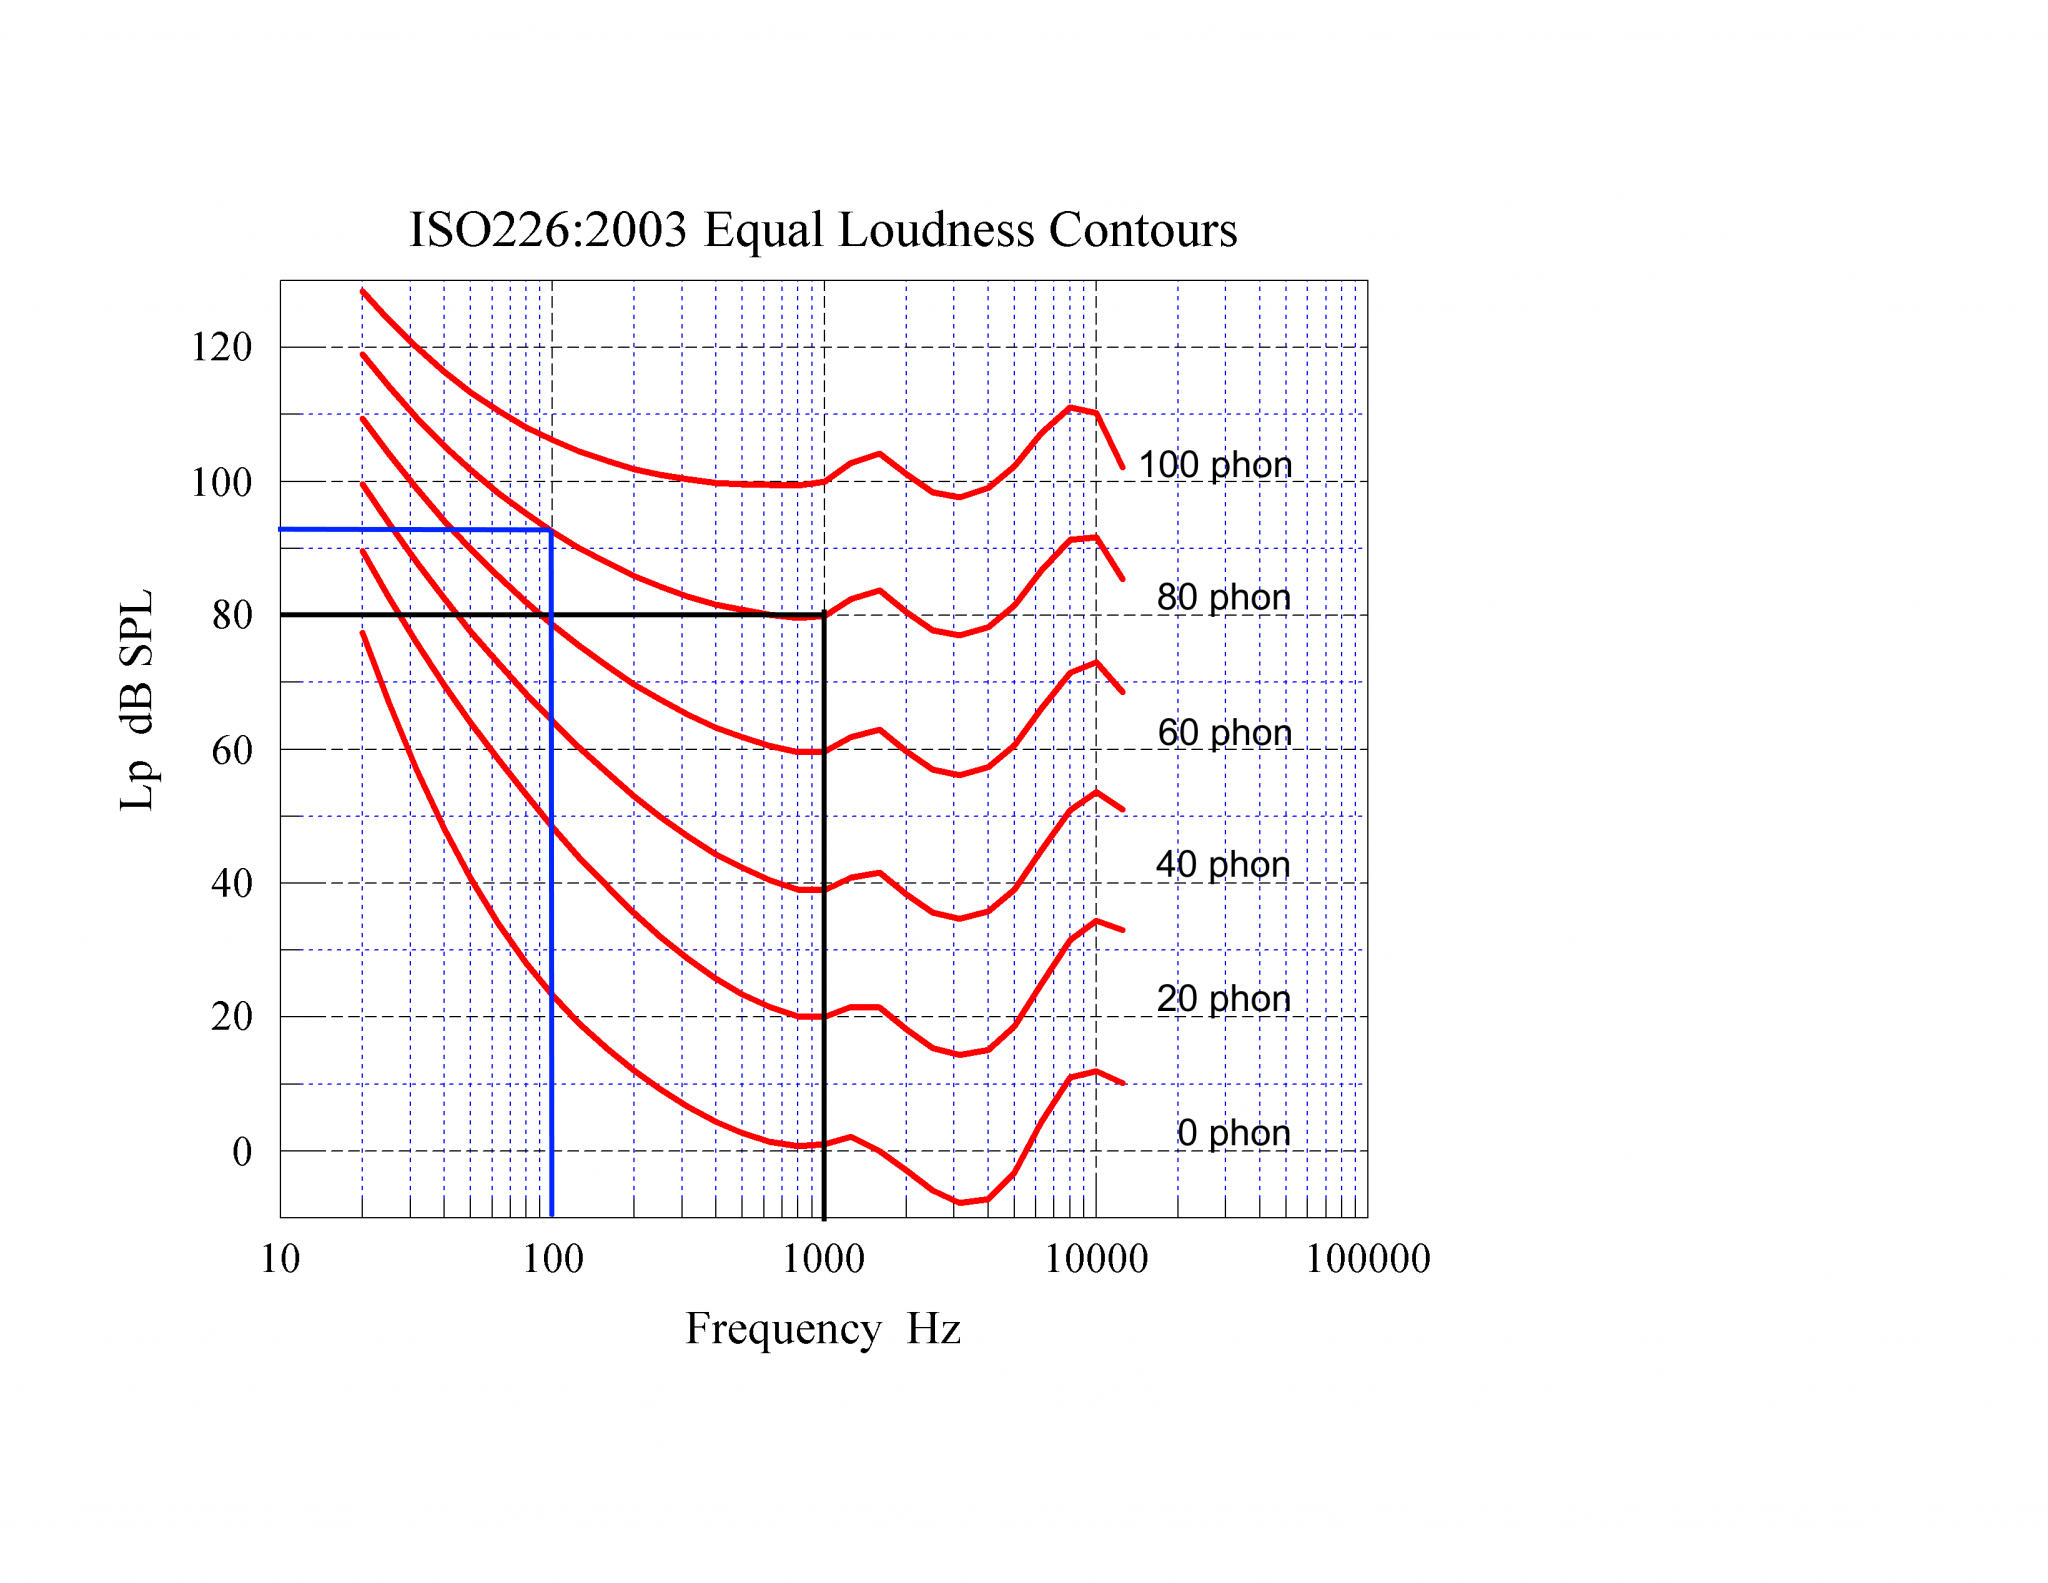 01 iso226-2003 Equal Loudness Contours - 80 phon 100 Hz and 1000 Hz.png